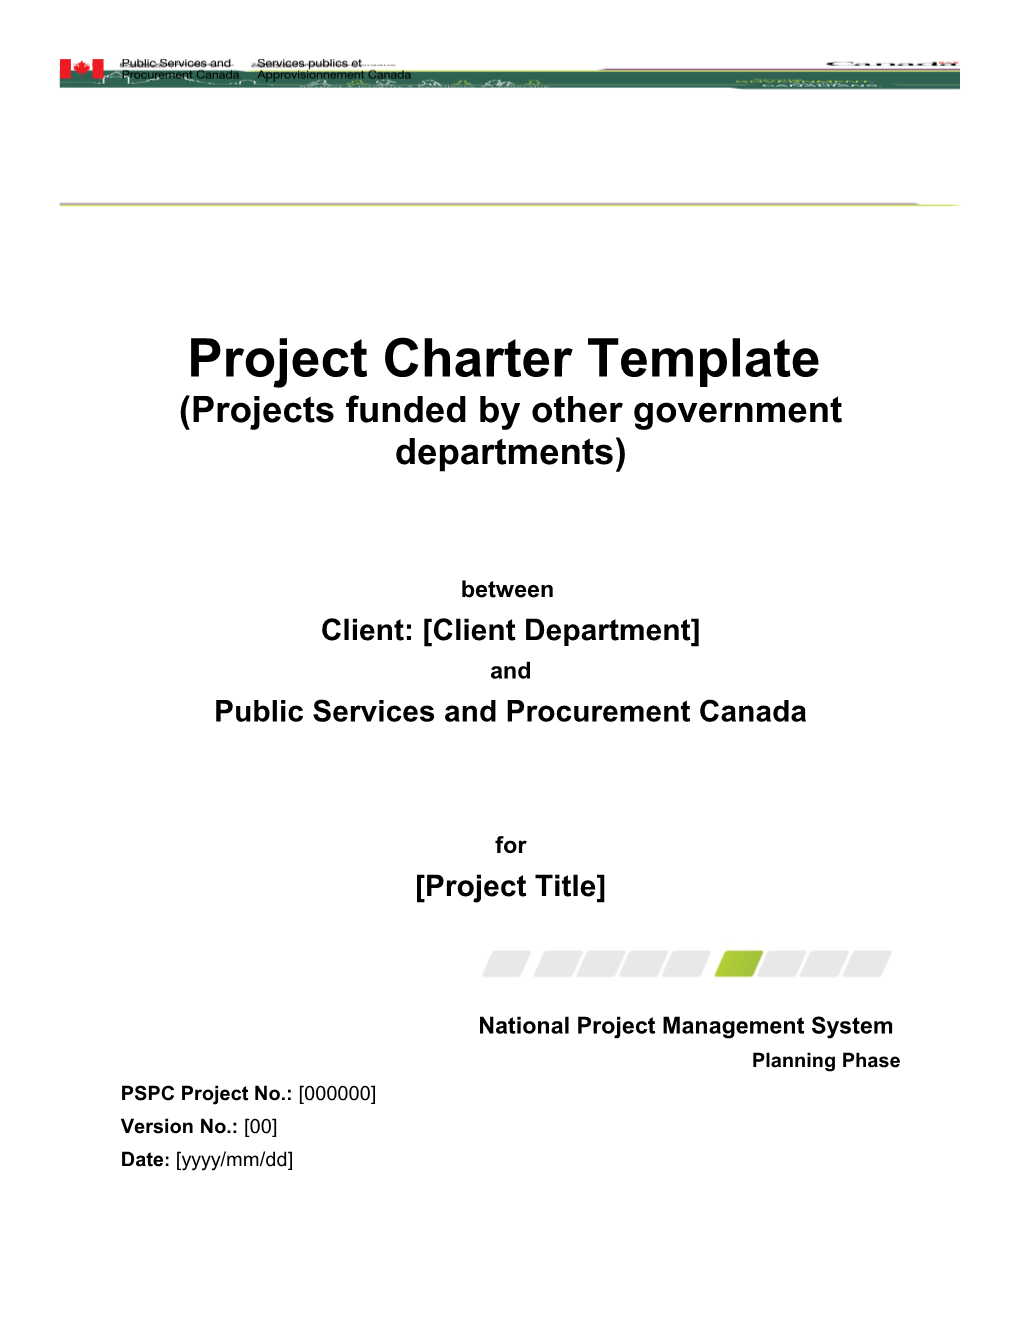 Project Charter Template (Projects Funded by Other Government Departments)